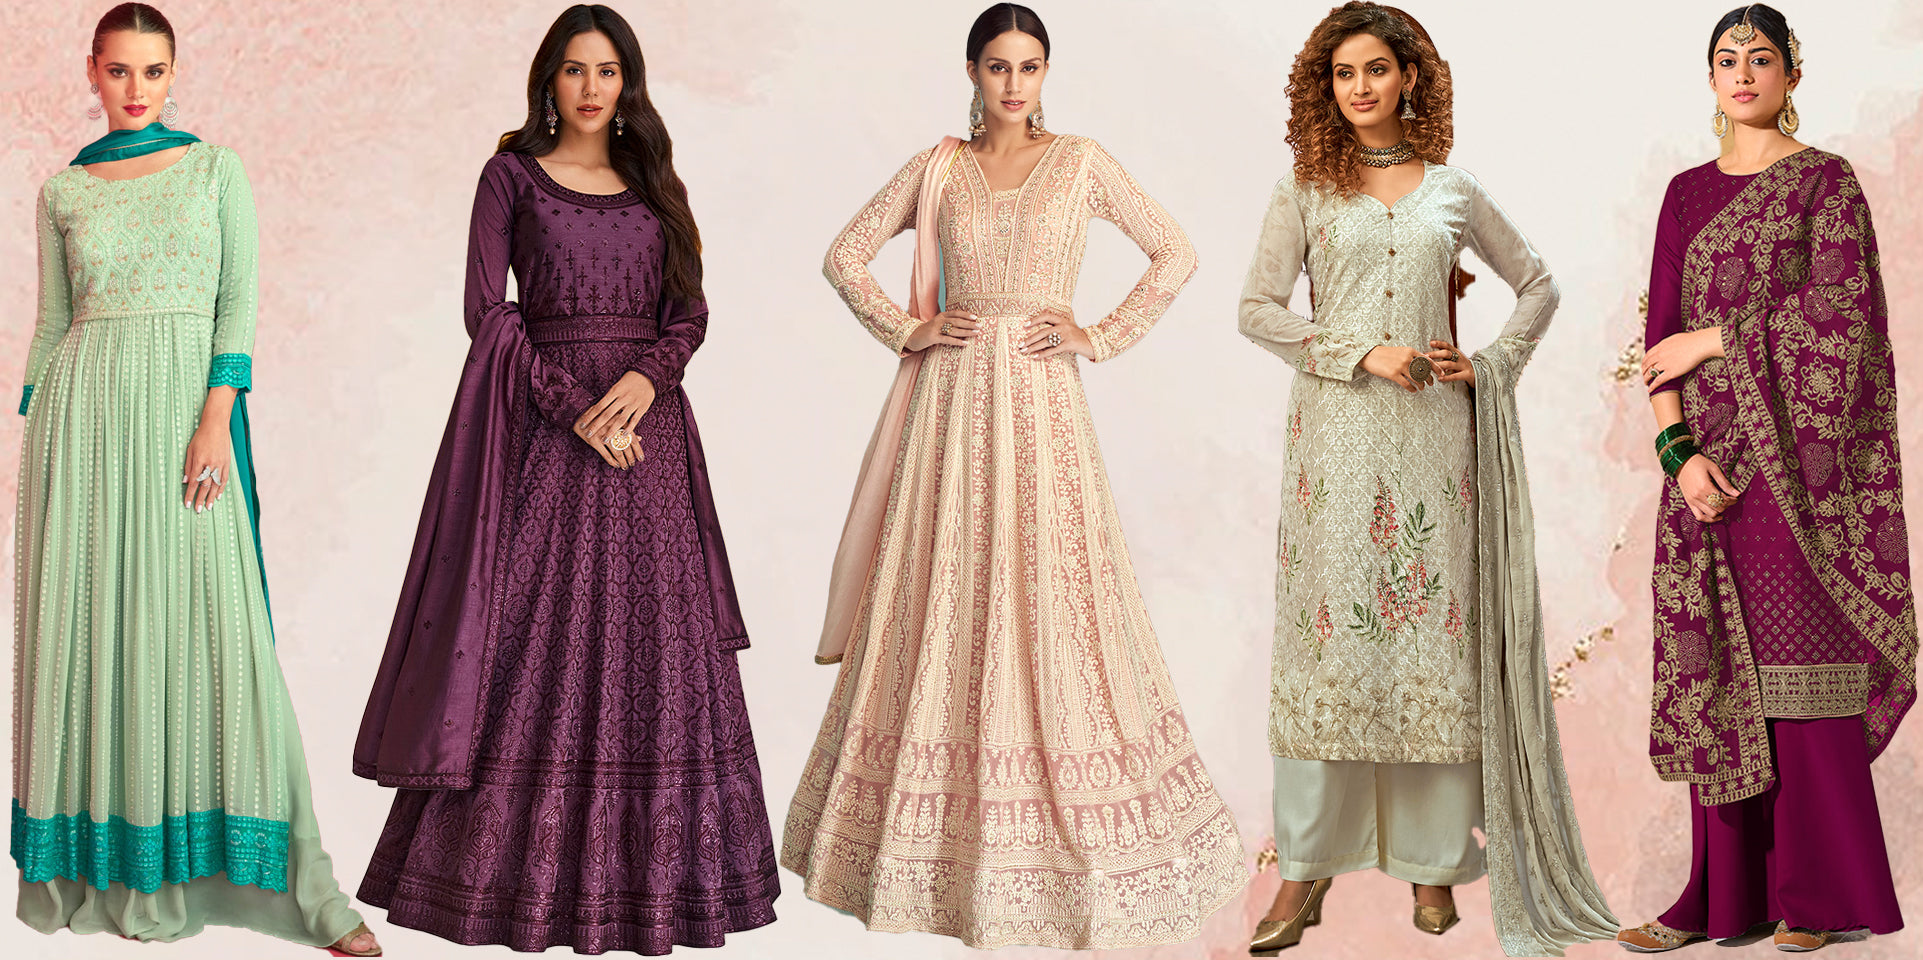 What are the Best Salwar Kameez Designs for this 20222 Diwali